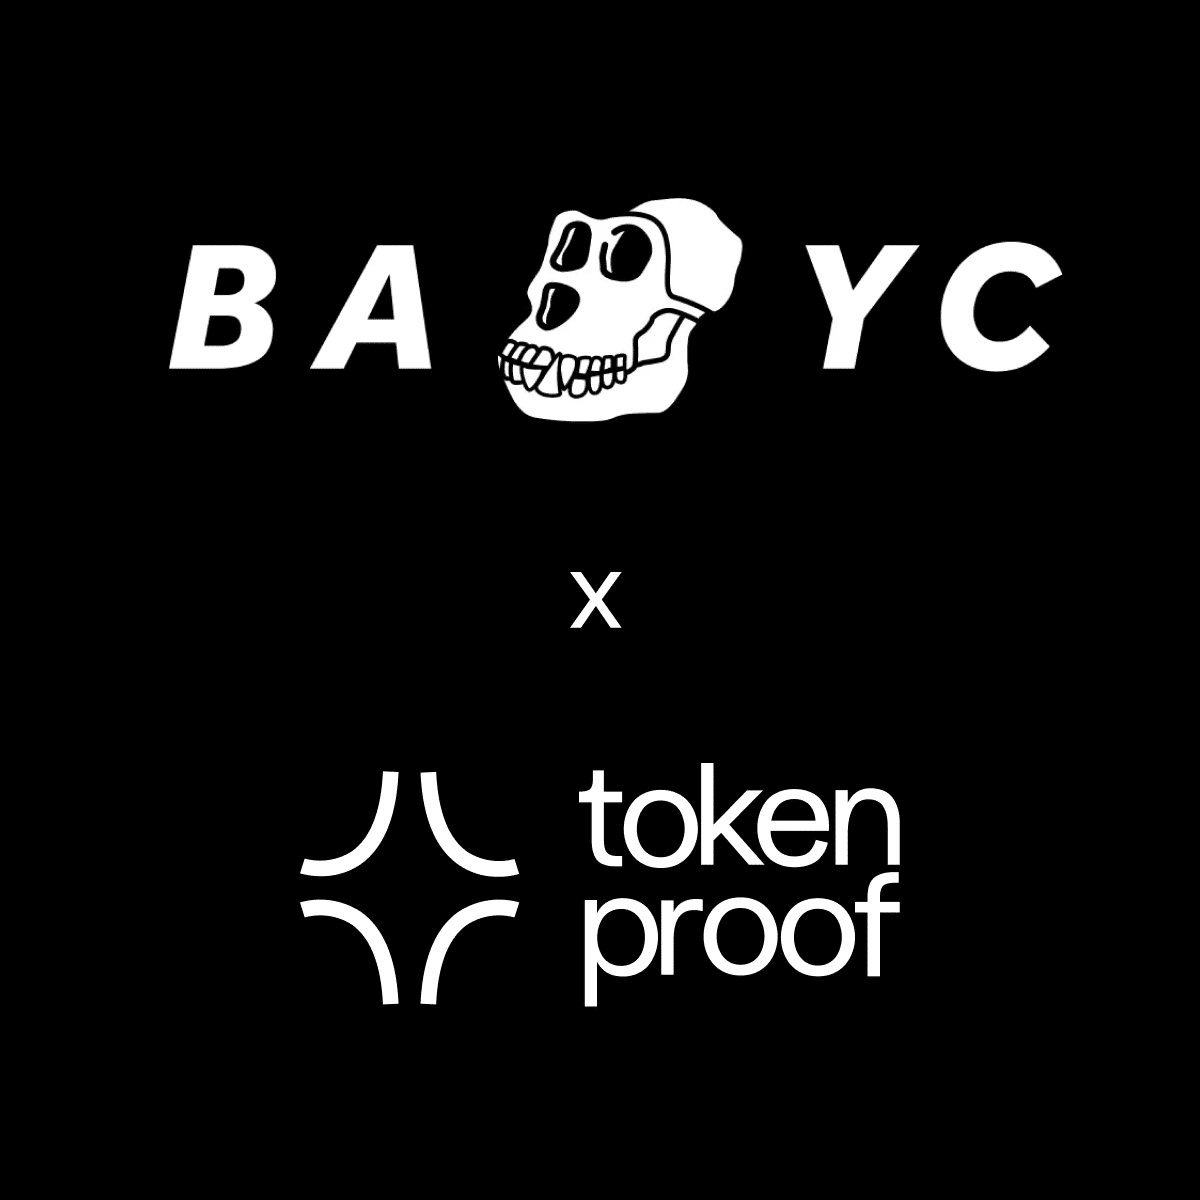 The picture shows two logos namely BAYC and Token Proof, a collaboration poster about ApeFest 2022